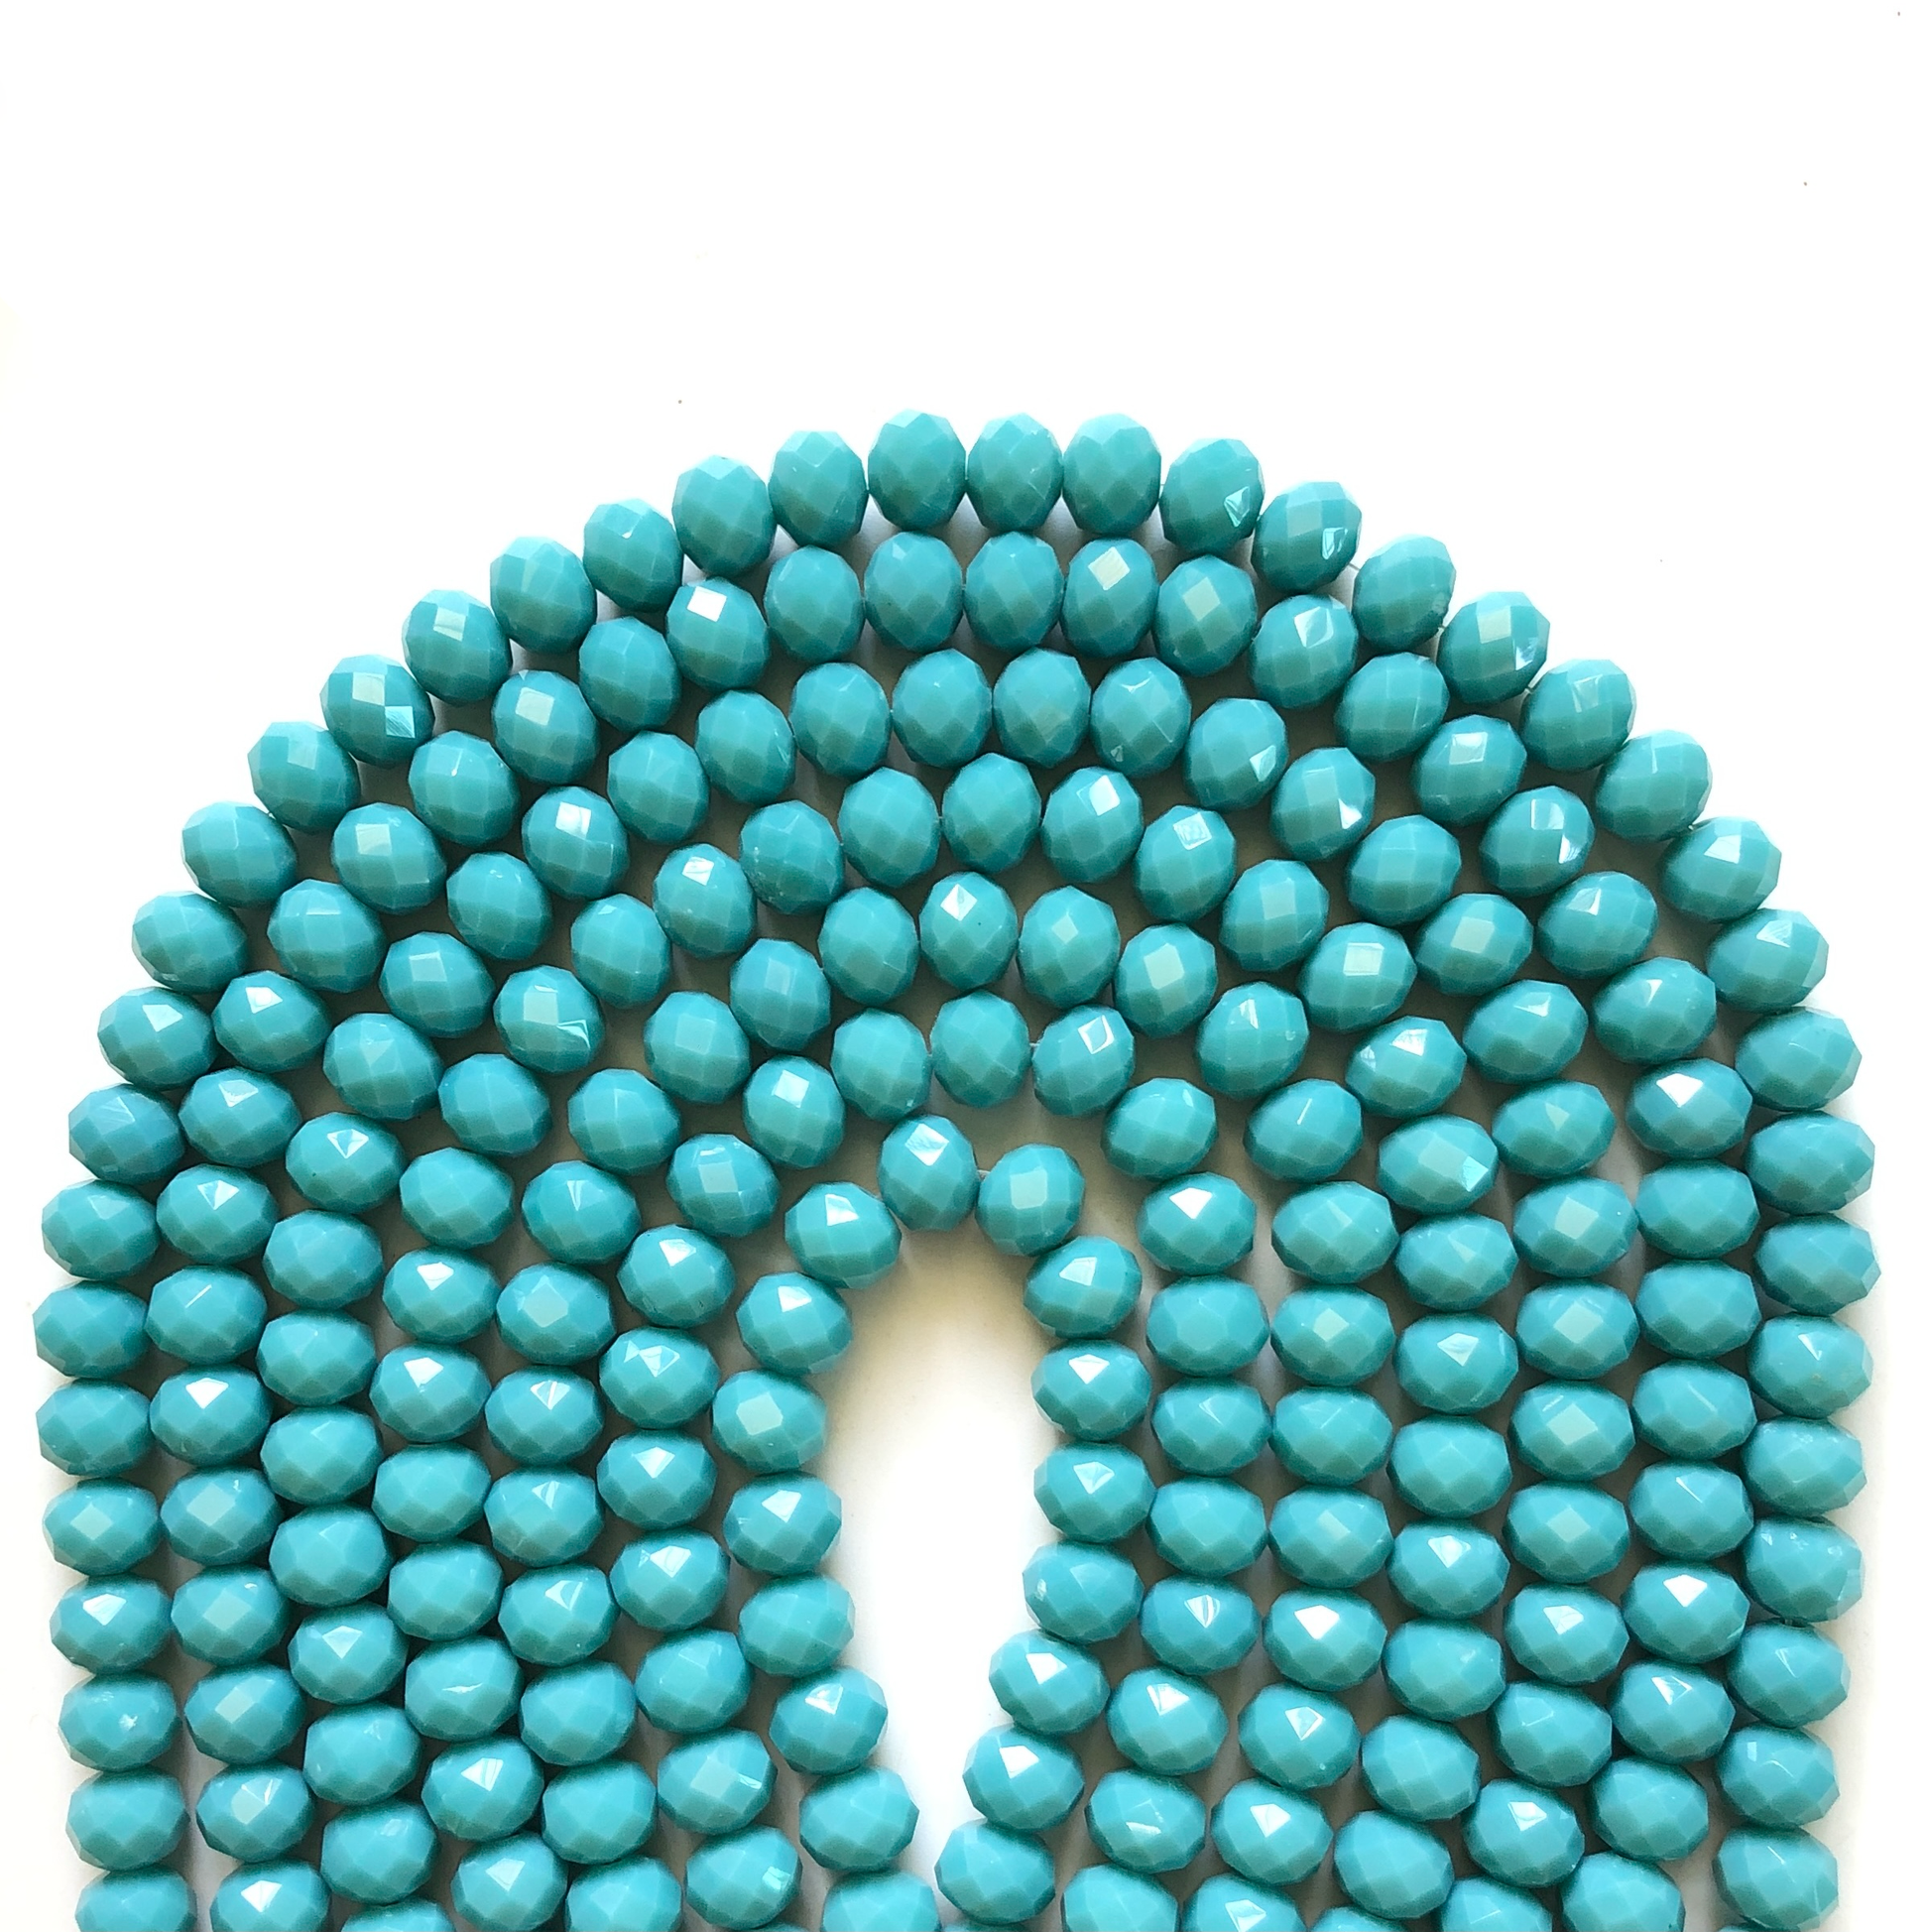 2 Strands/lot 10mm Bright Turquoise Faceted Glass Beads Glass Beads Faceted Glass Beads Charms Beads Beyond